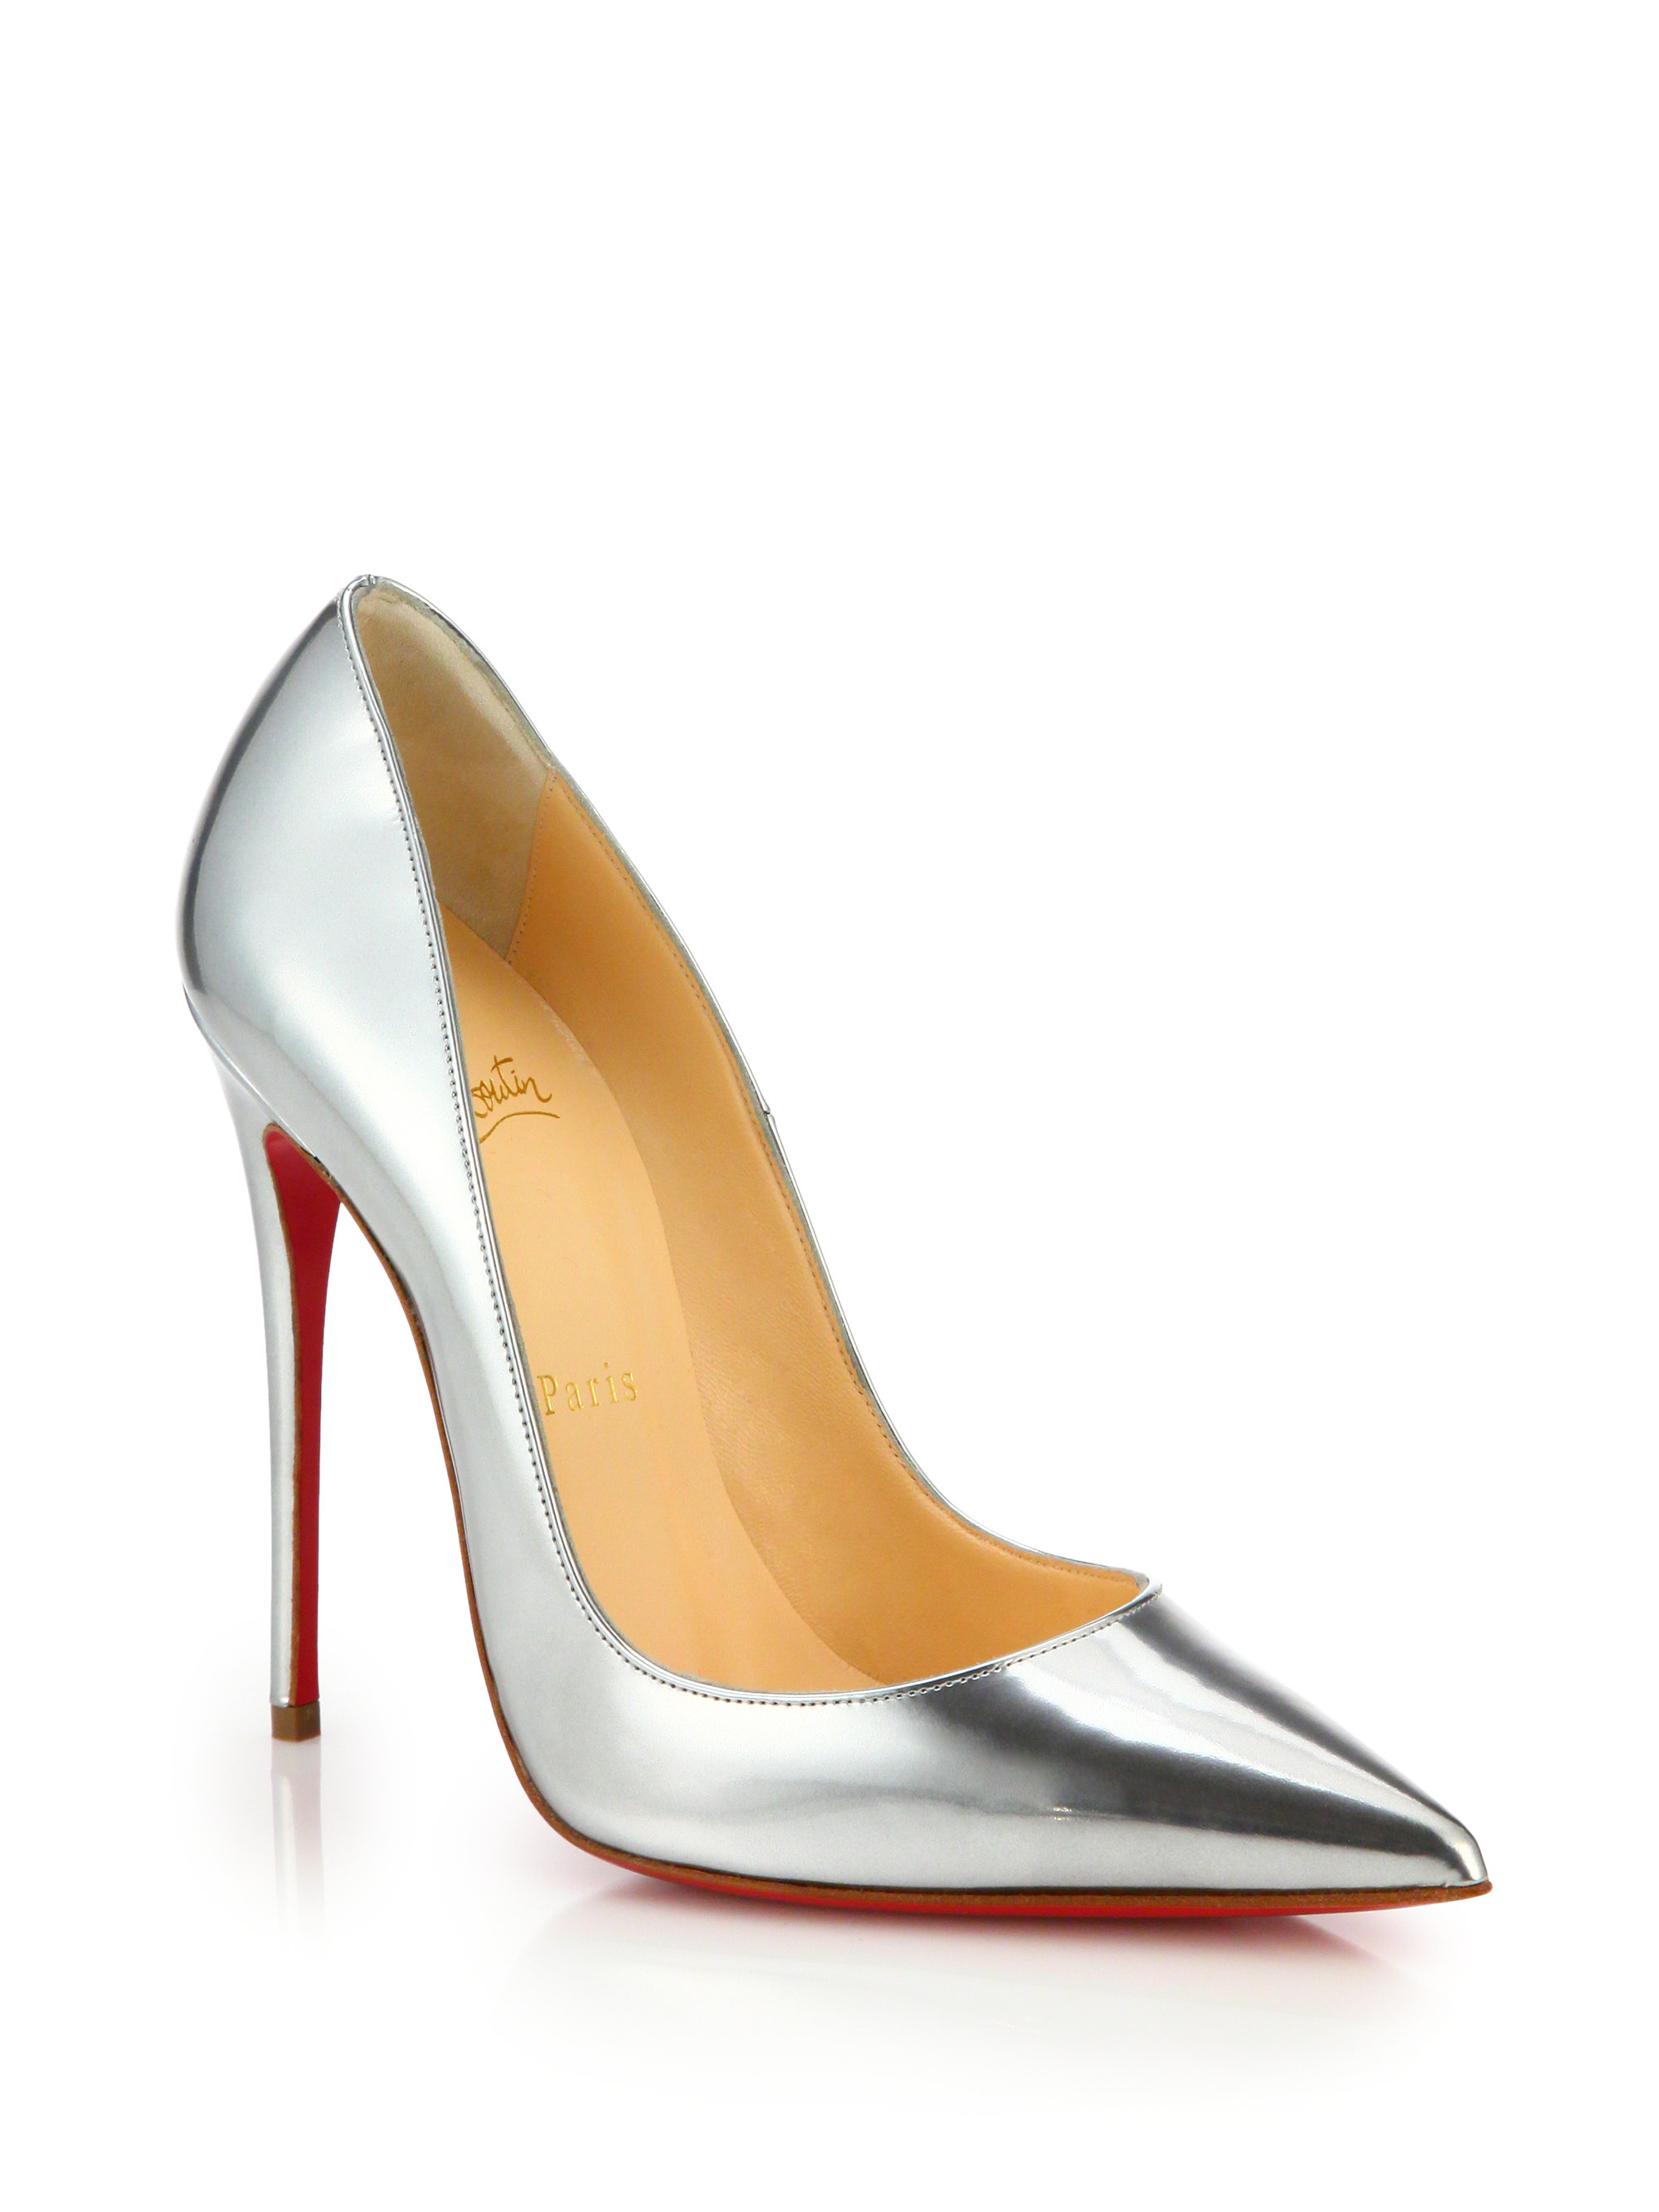 Christian louboutin So Kate Metallic Leather Pumps in Silver | Lyst